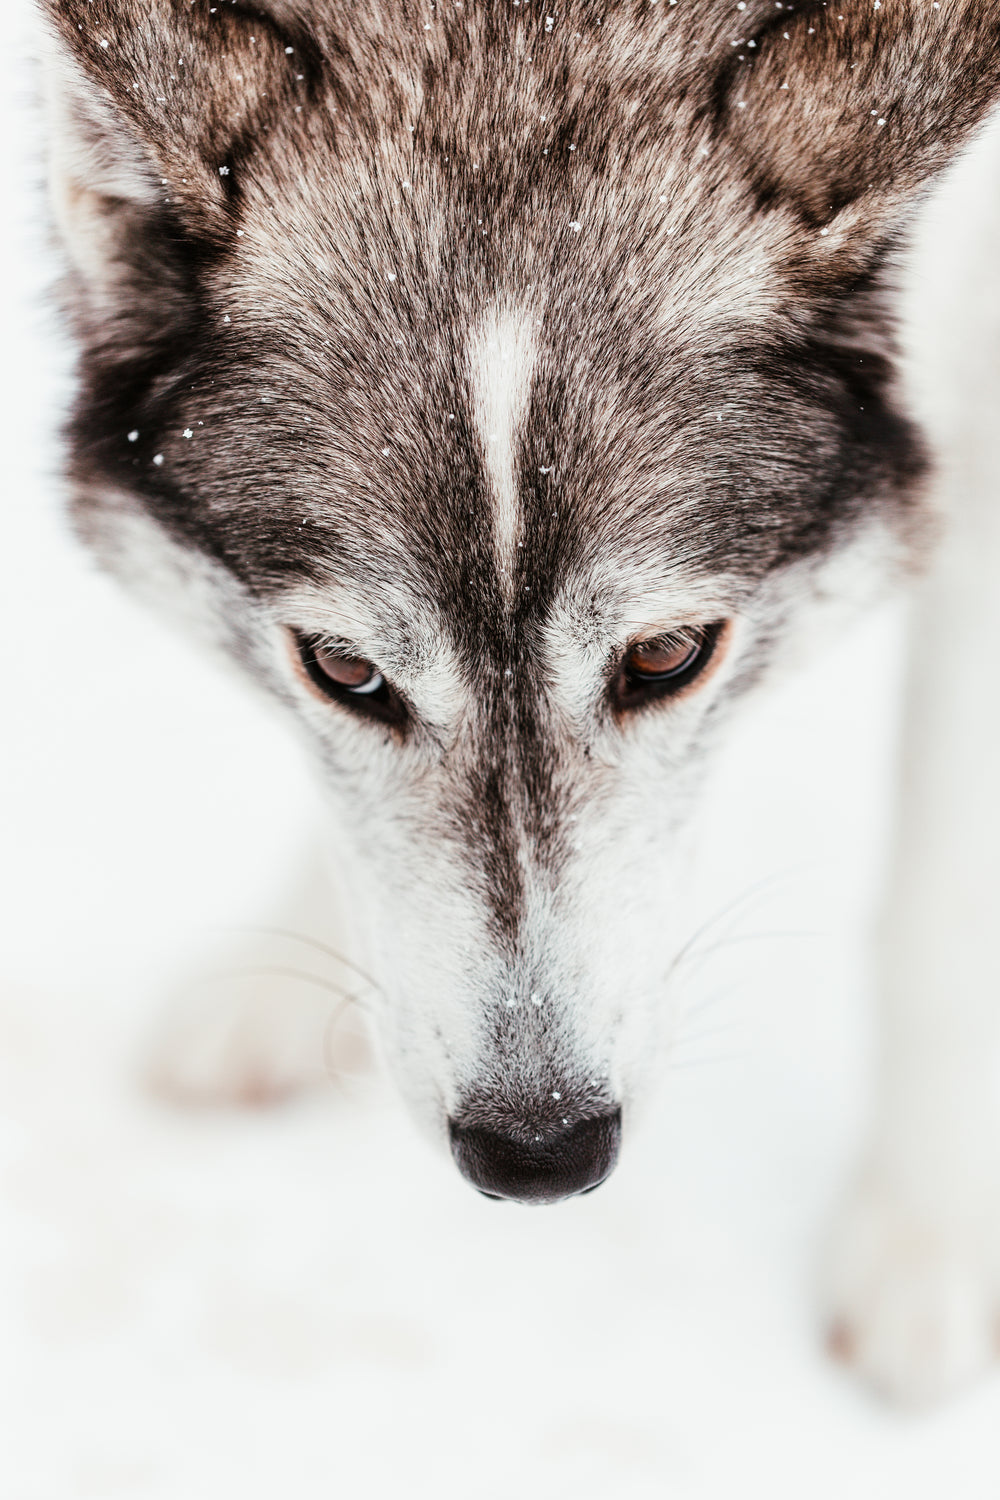 sled dog with warm brown eyes lowers nose to ground